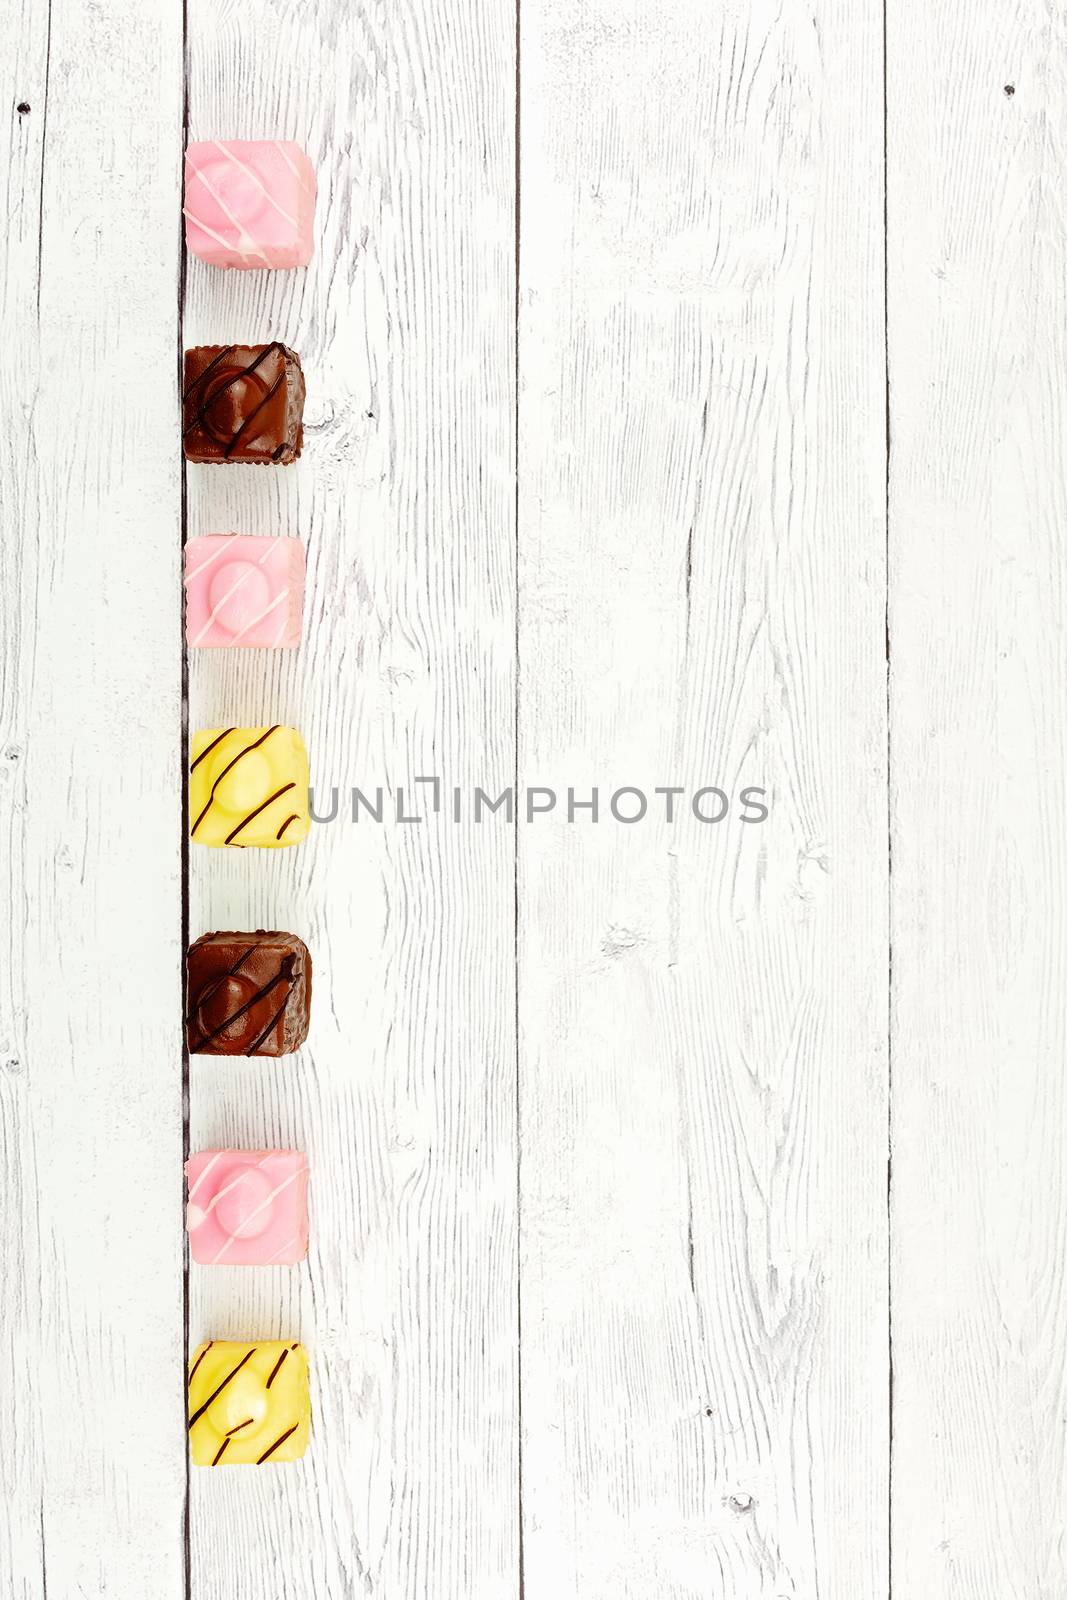 Row of miniature colorful iced cakes on board background with space for copy text, top view flat lay